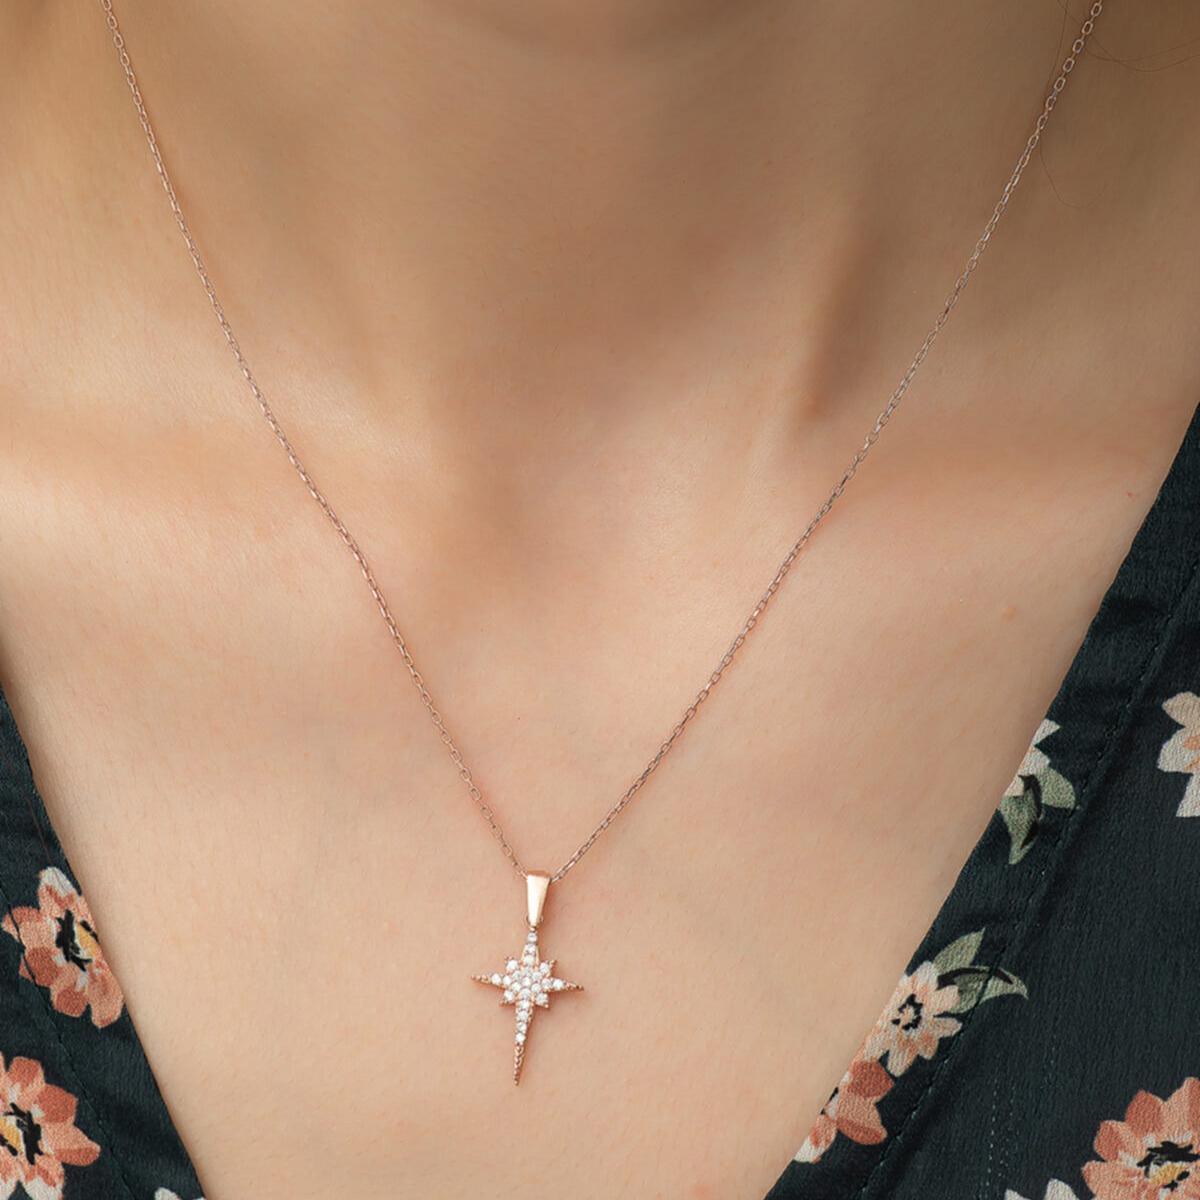 Tiny North Star Necklace • Northern Star Necklace • Tiny Necklace Gold - Trending Silver Gifts